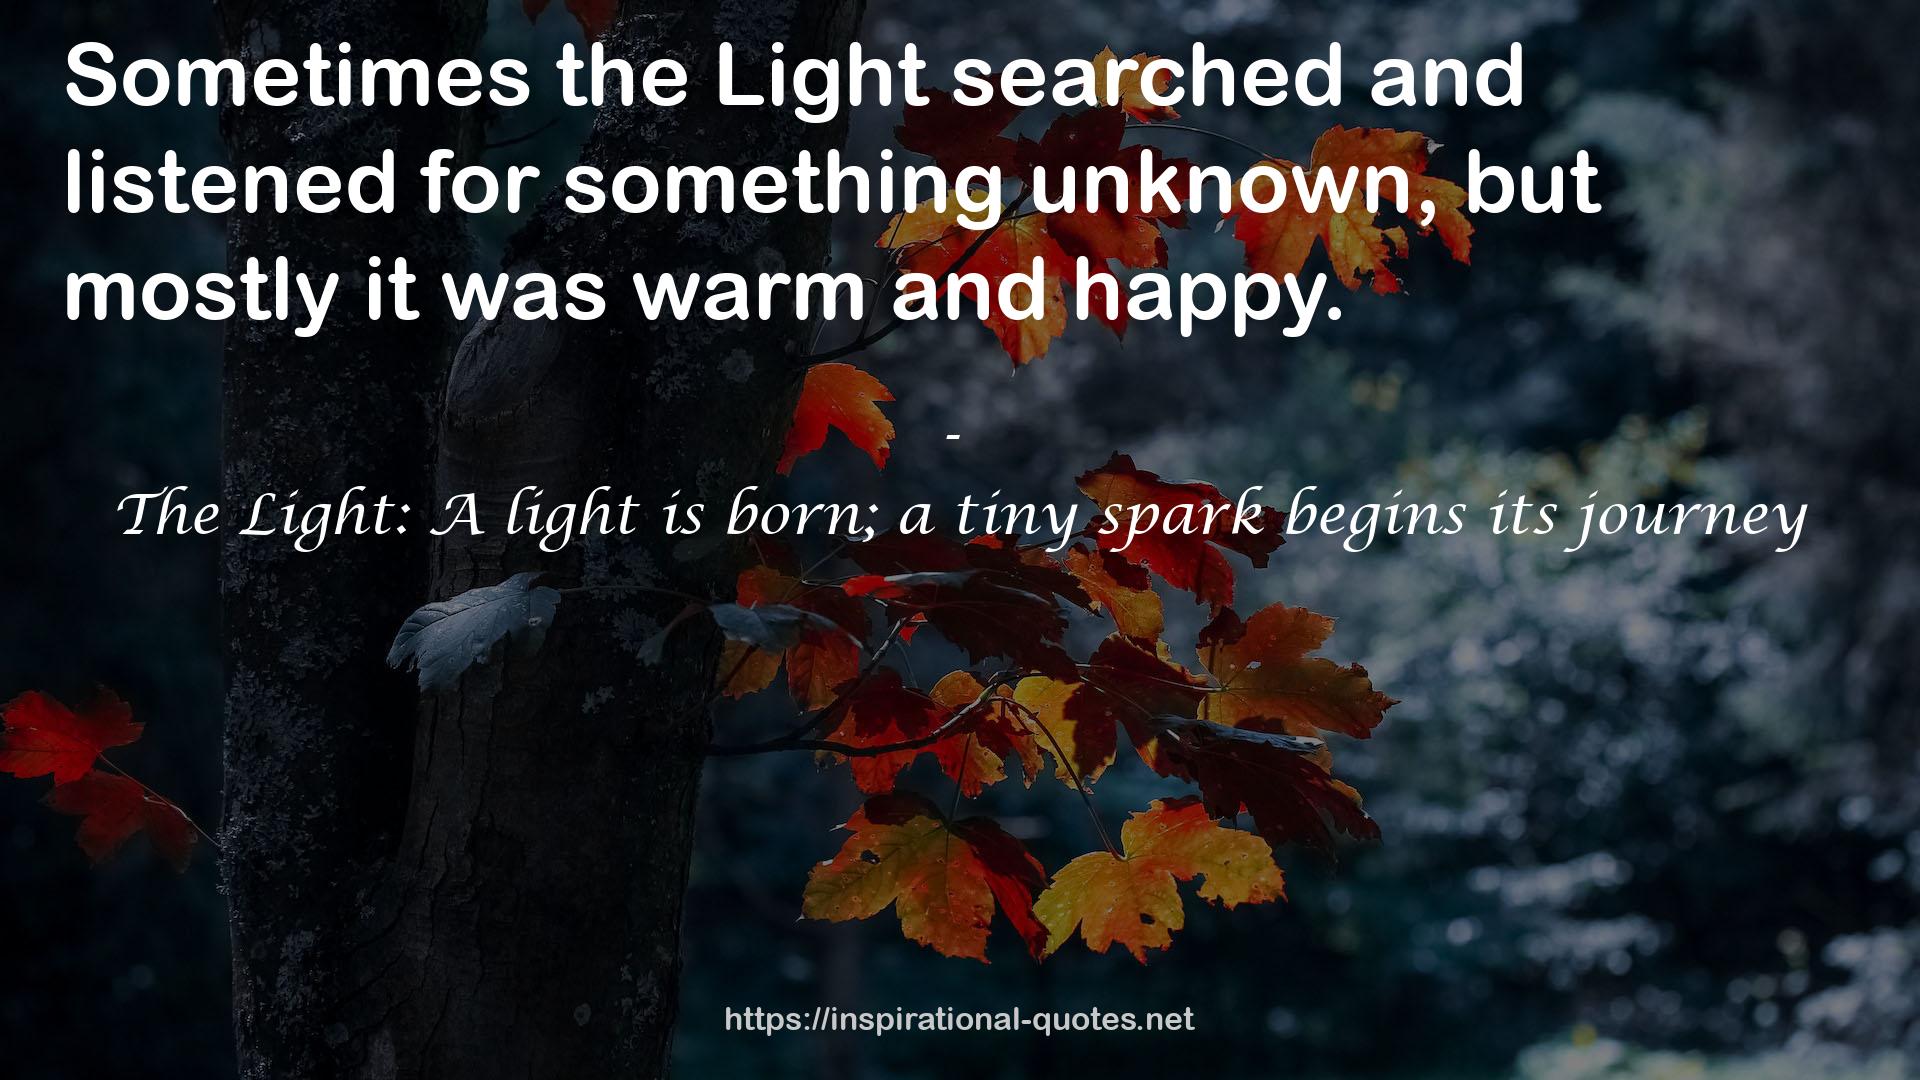 The Light: A light is born; a tiny spark begins its journey QUOTES